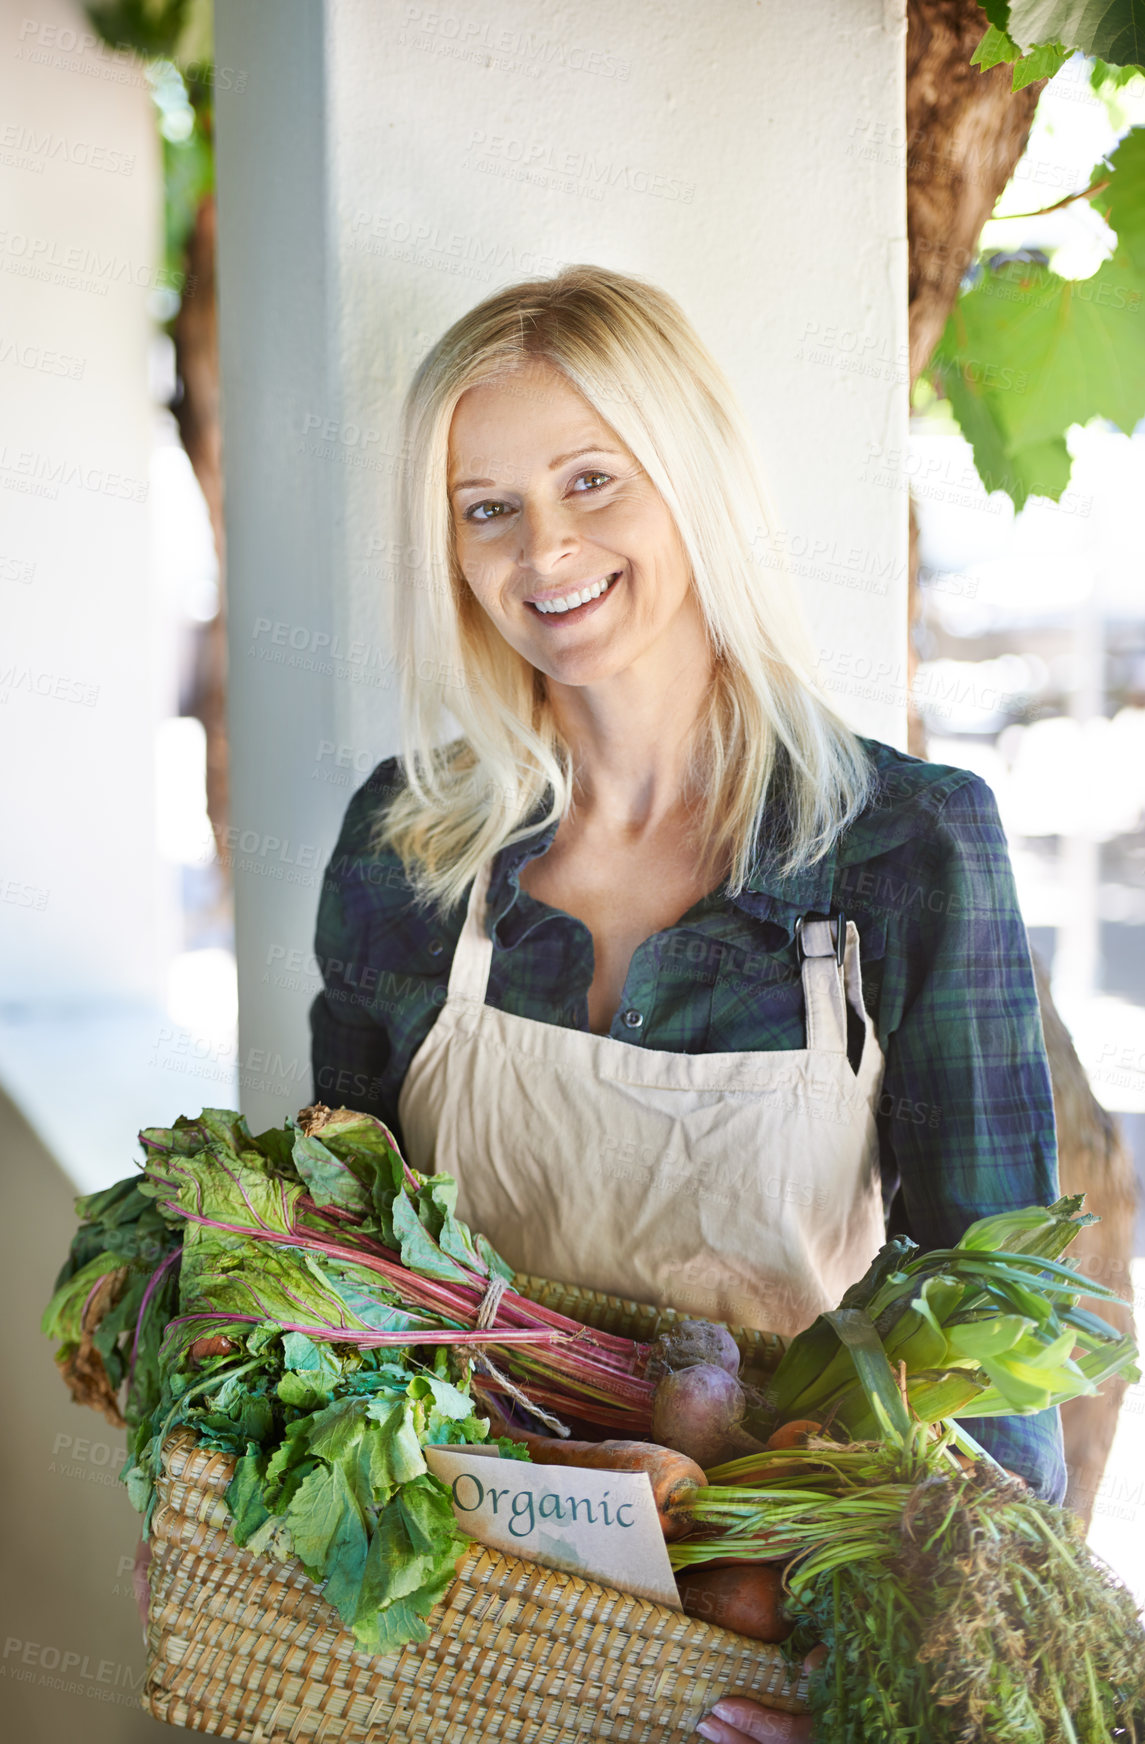 Buy stock photo Farming, vegetables and portrait of woman with basket for agriculture, harvest or organic produce. Cultivation, fresh crop and female person with apron for agro business, gardening or sustainability